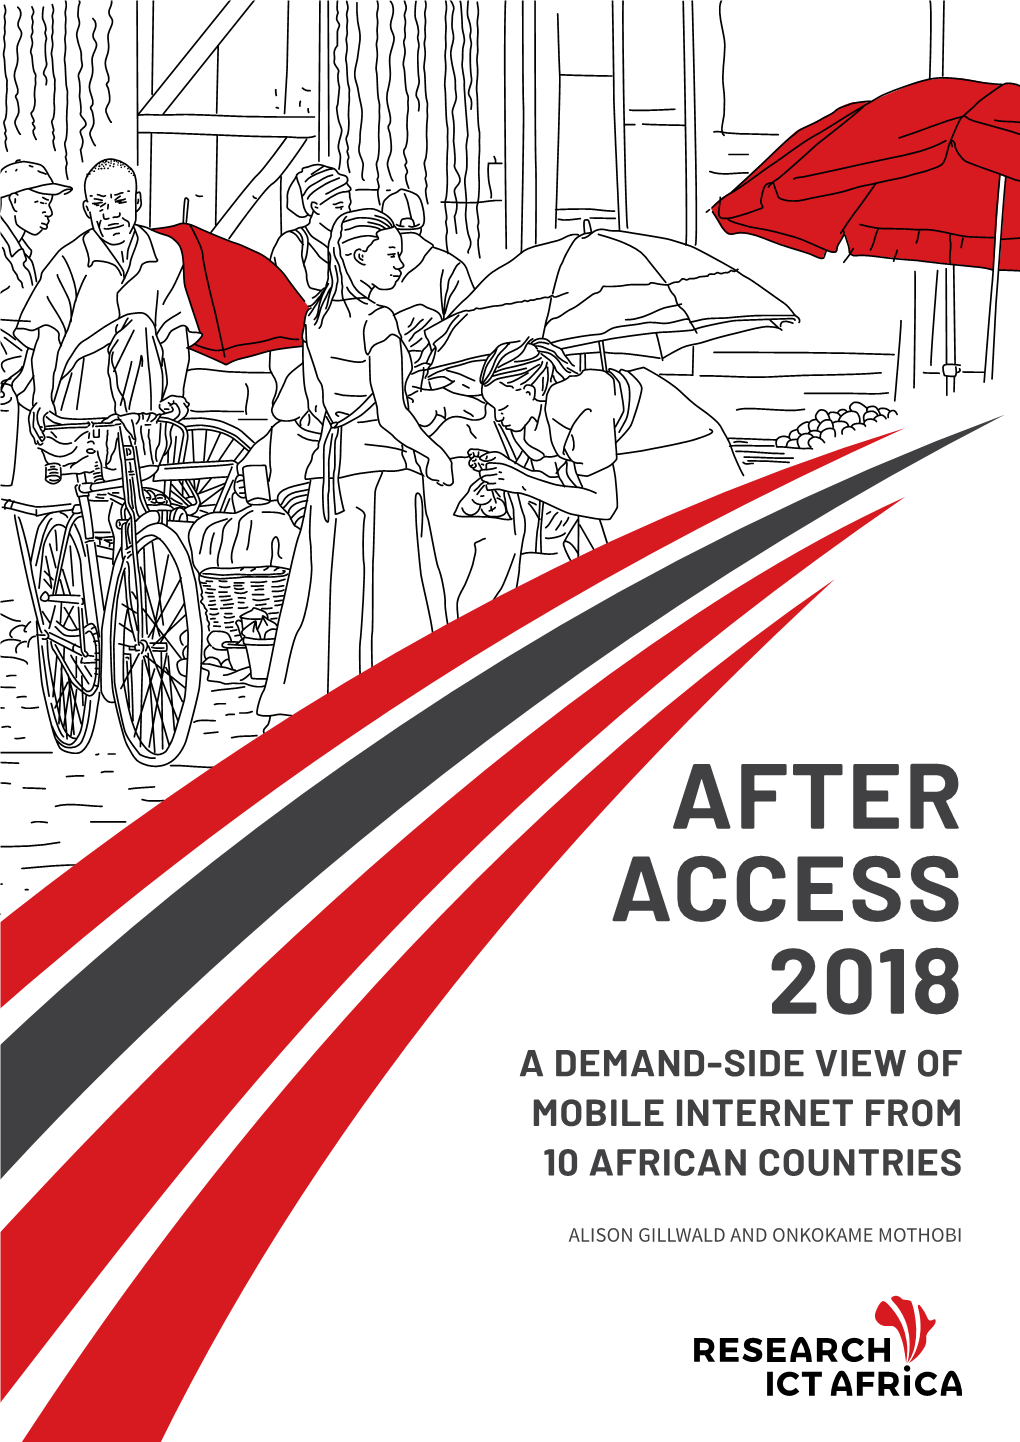 After Access 2018 a Demand-Side View of Mobile Internet from 10 African Countries